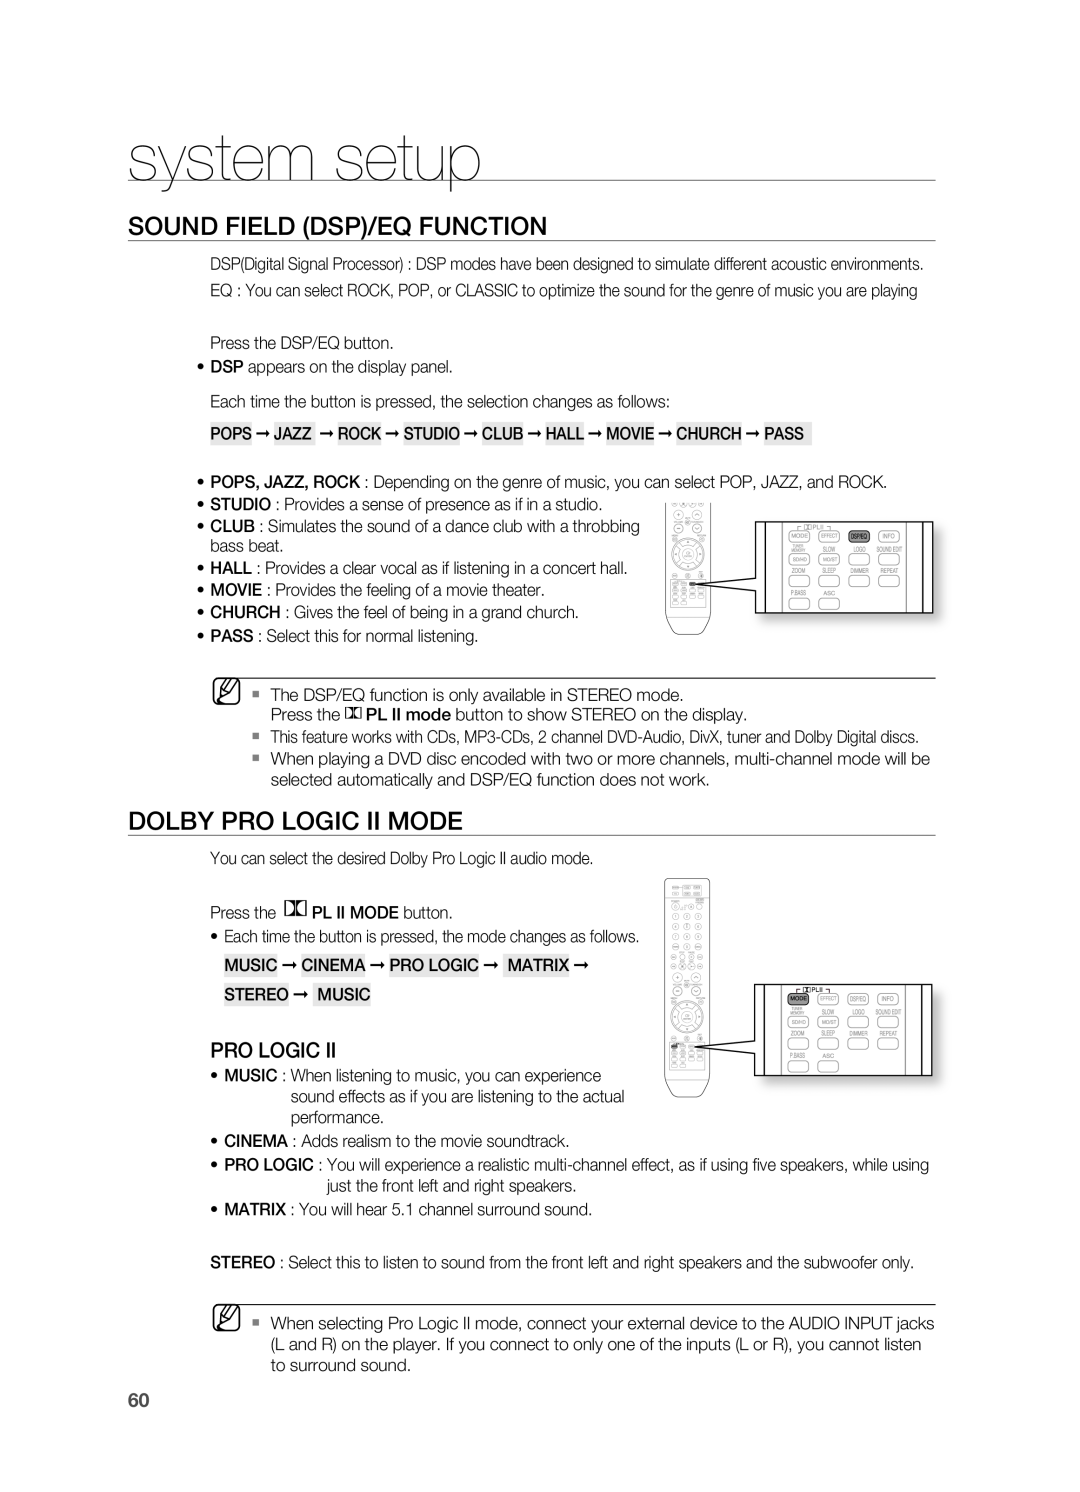 Samsung HT-TWZ415 user manual Sound Field Dsp/Eq Function, DOLBY PrO LOgIC II MODE, system setup 